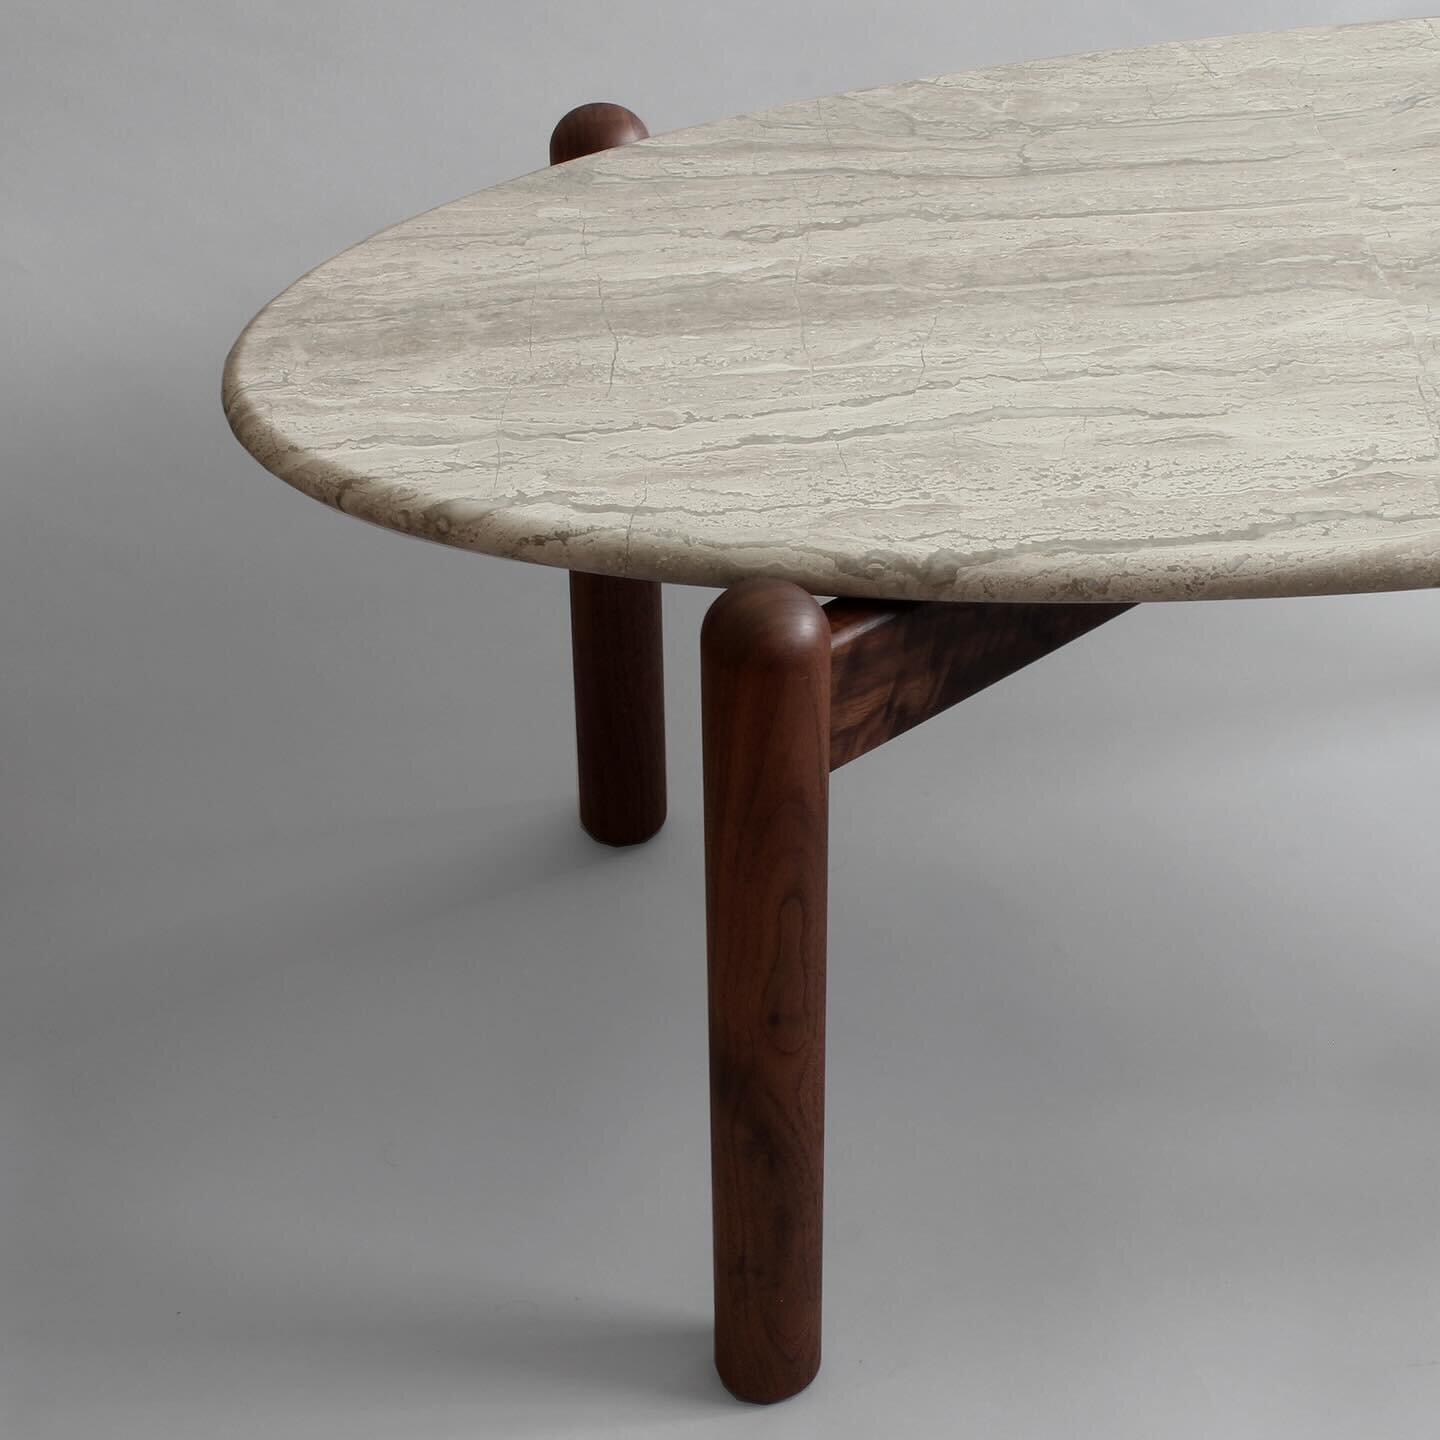 Custom Ellipse coffee table for @leonoramahle in silver travertine and black walnut